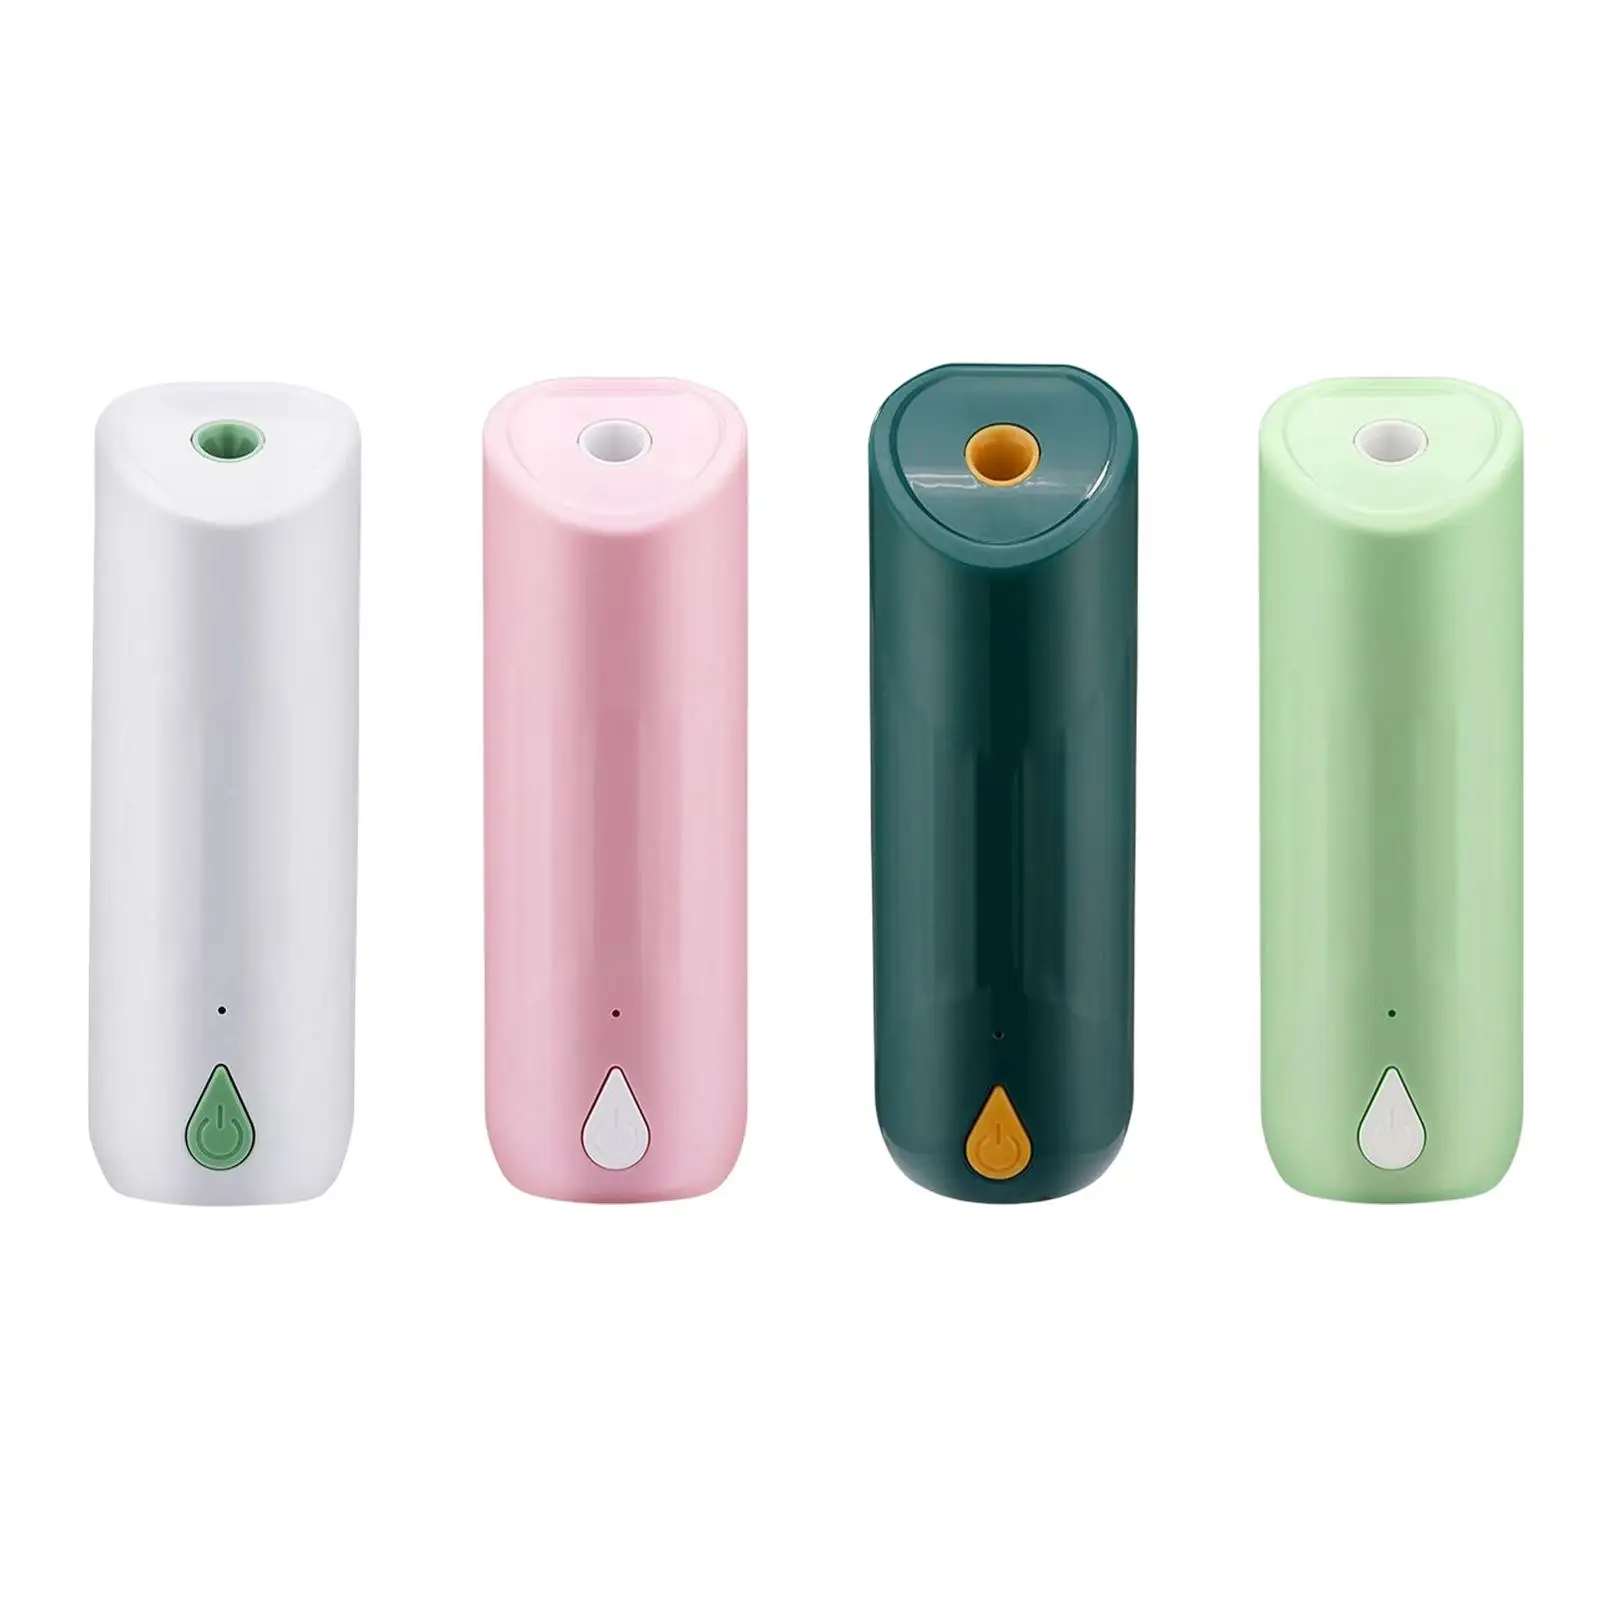 Fragrance Diffuser Spray Dispenser Mini Air Humidifier Wall Mounted/Free Standing Mist Sprayer Noiseless for Hotel Office Home